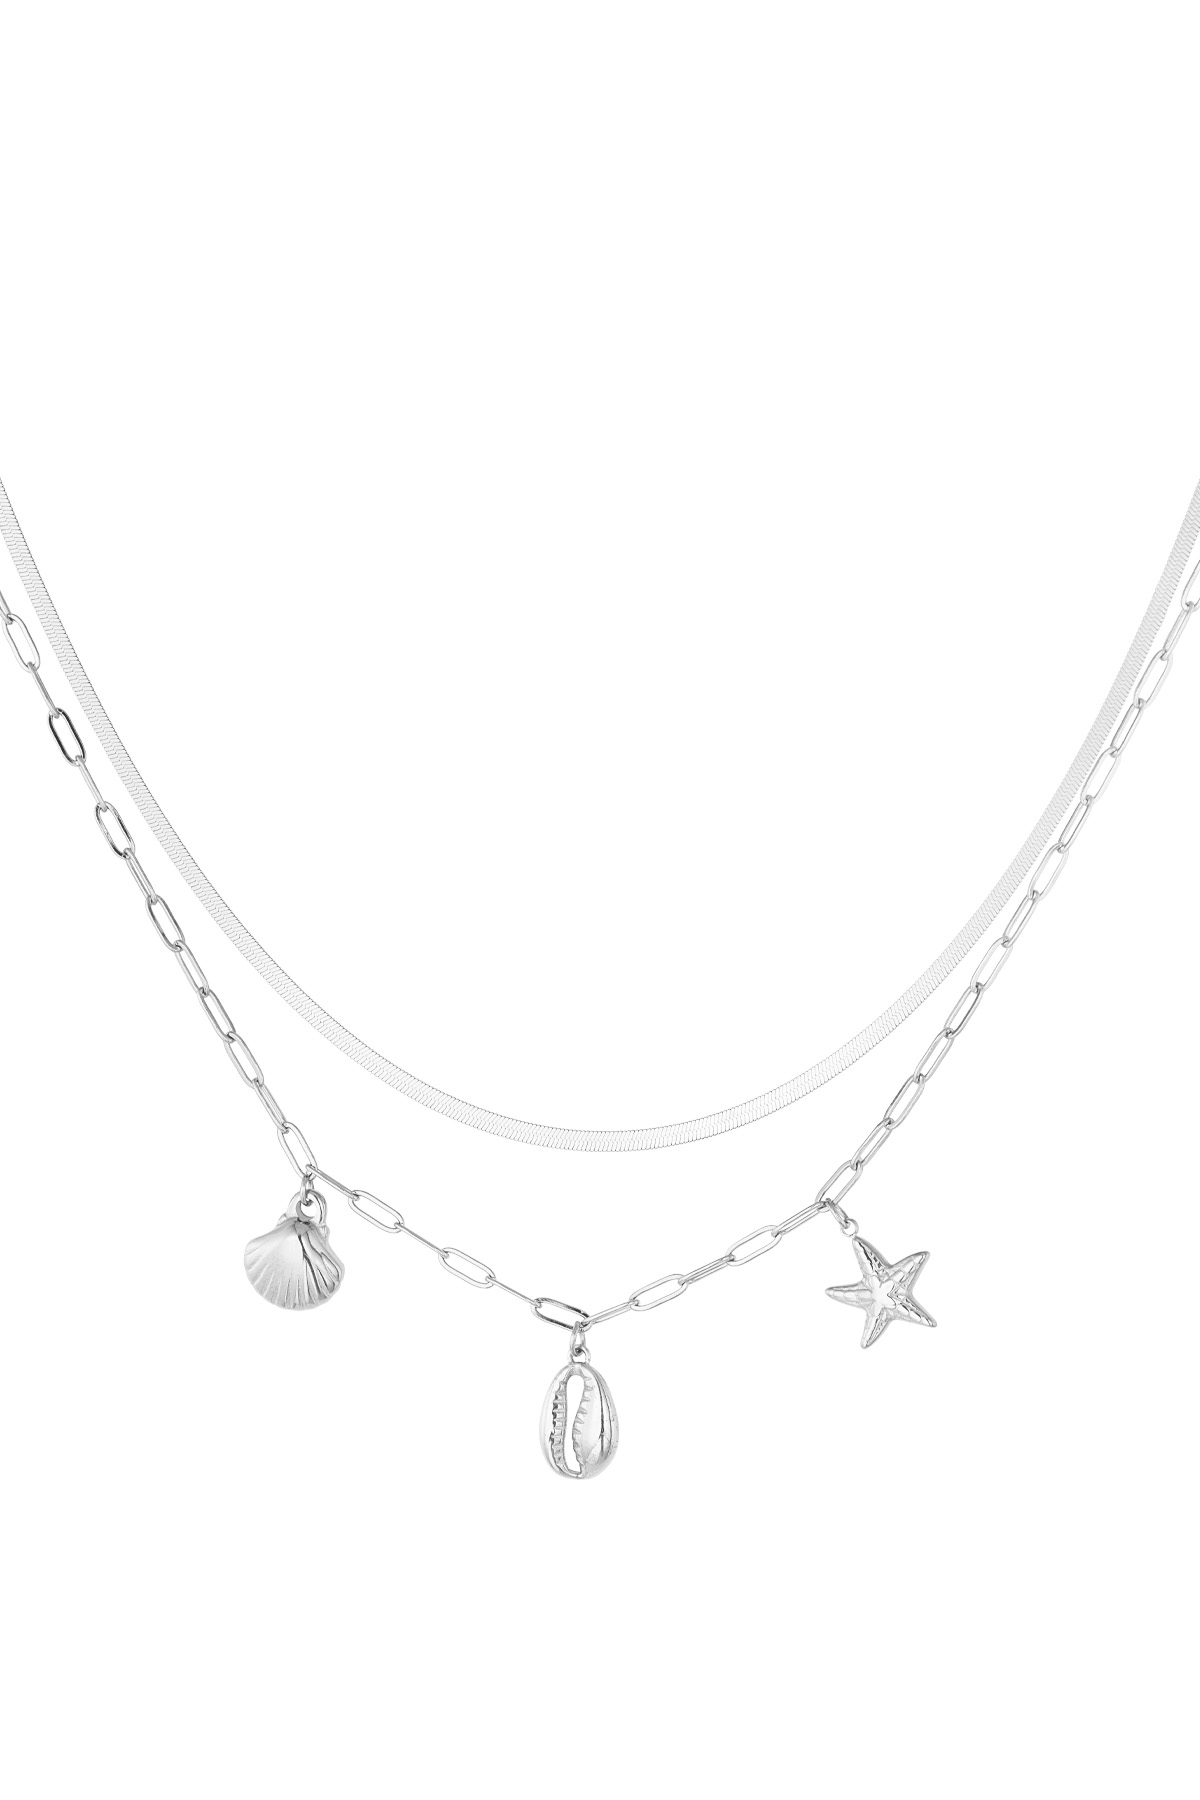 Sea side charm necklace - silver